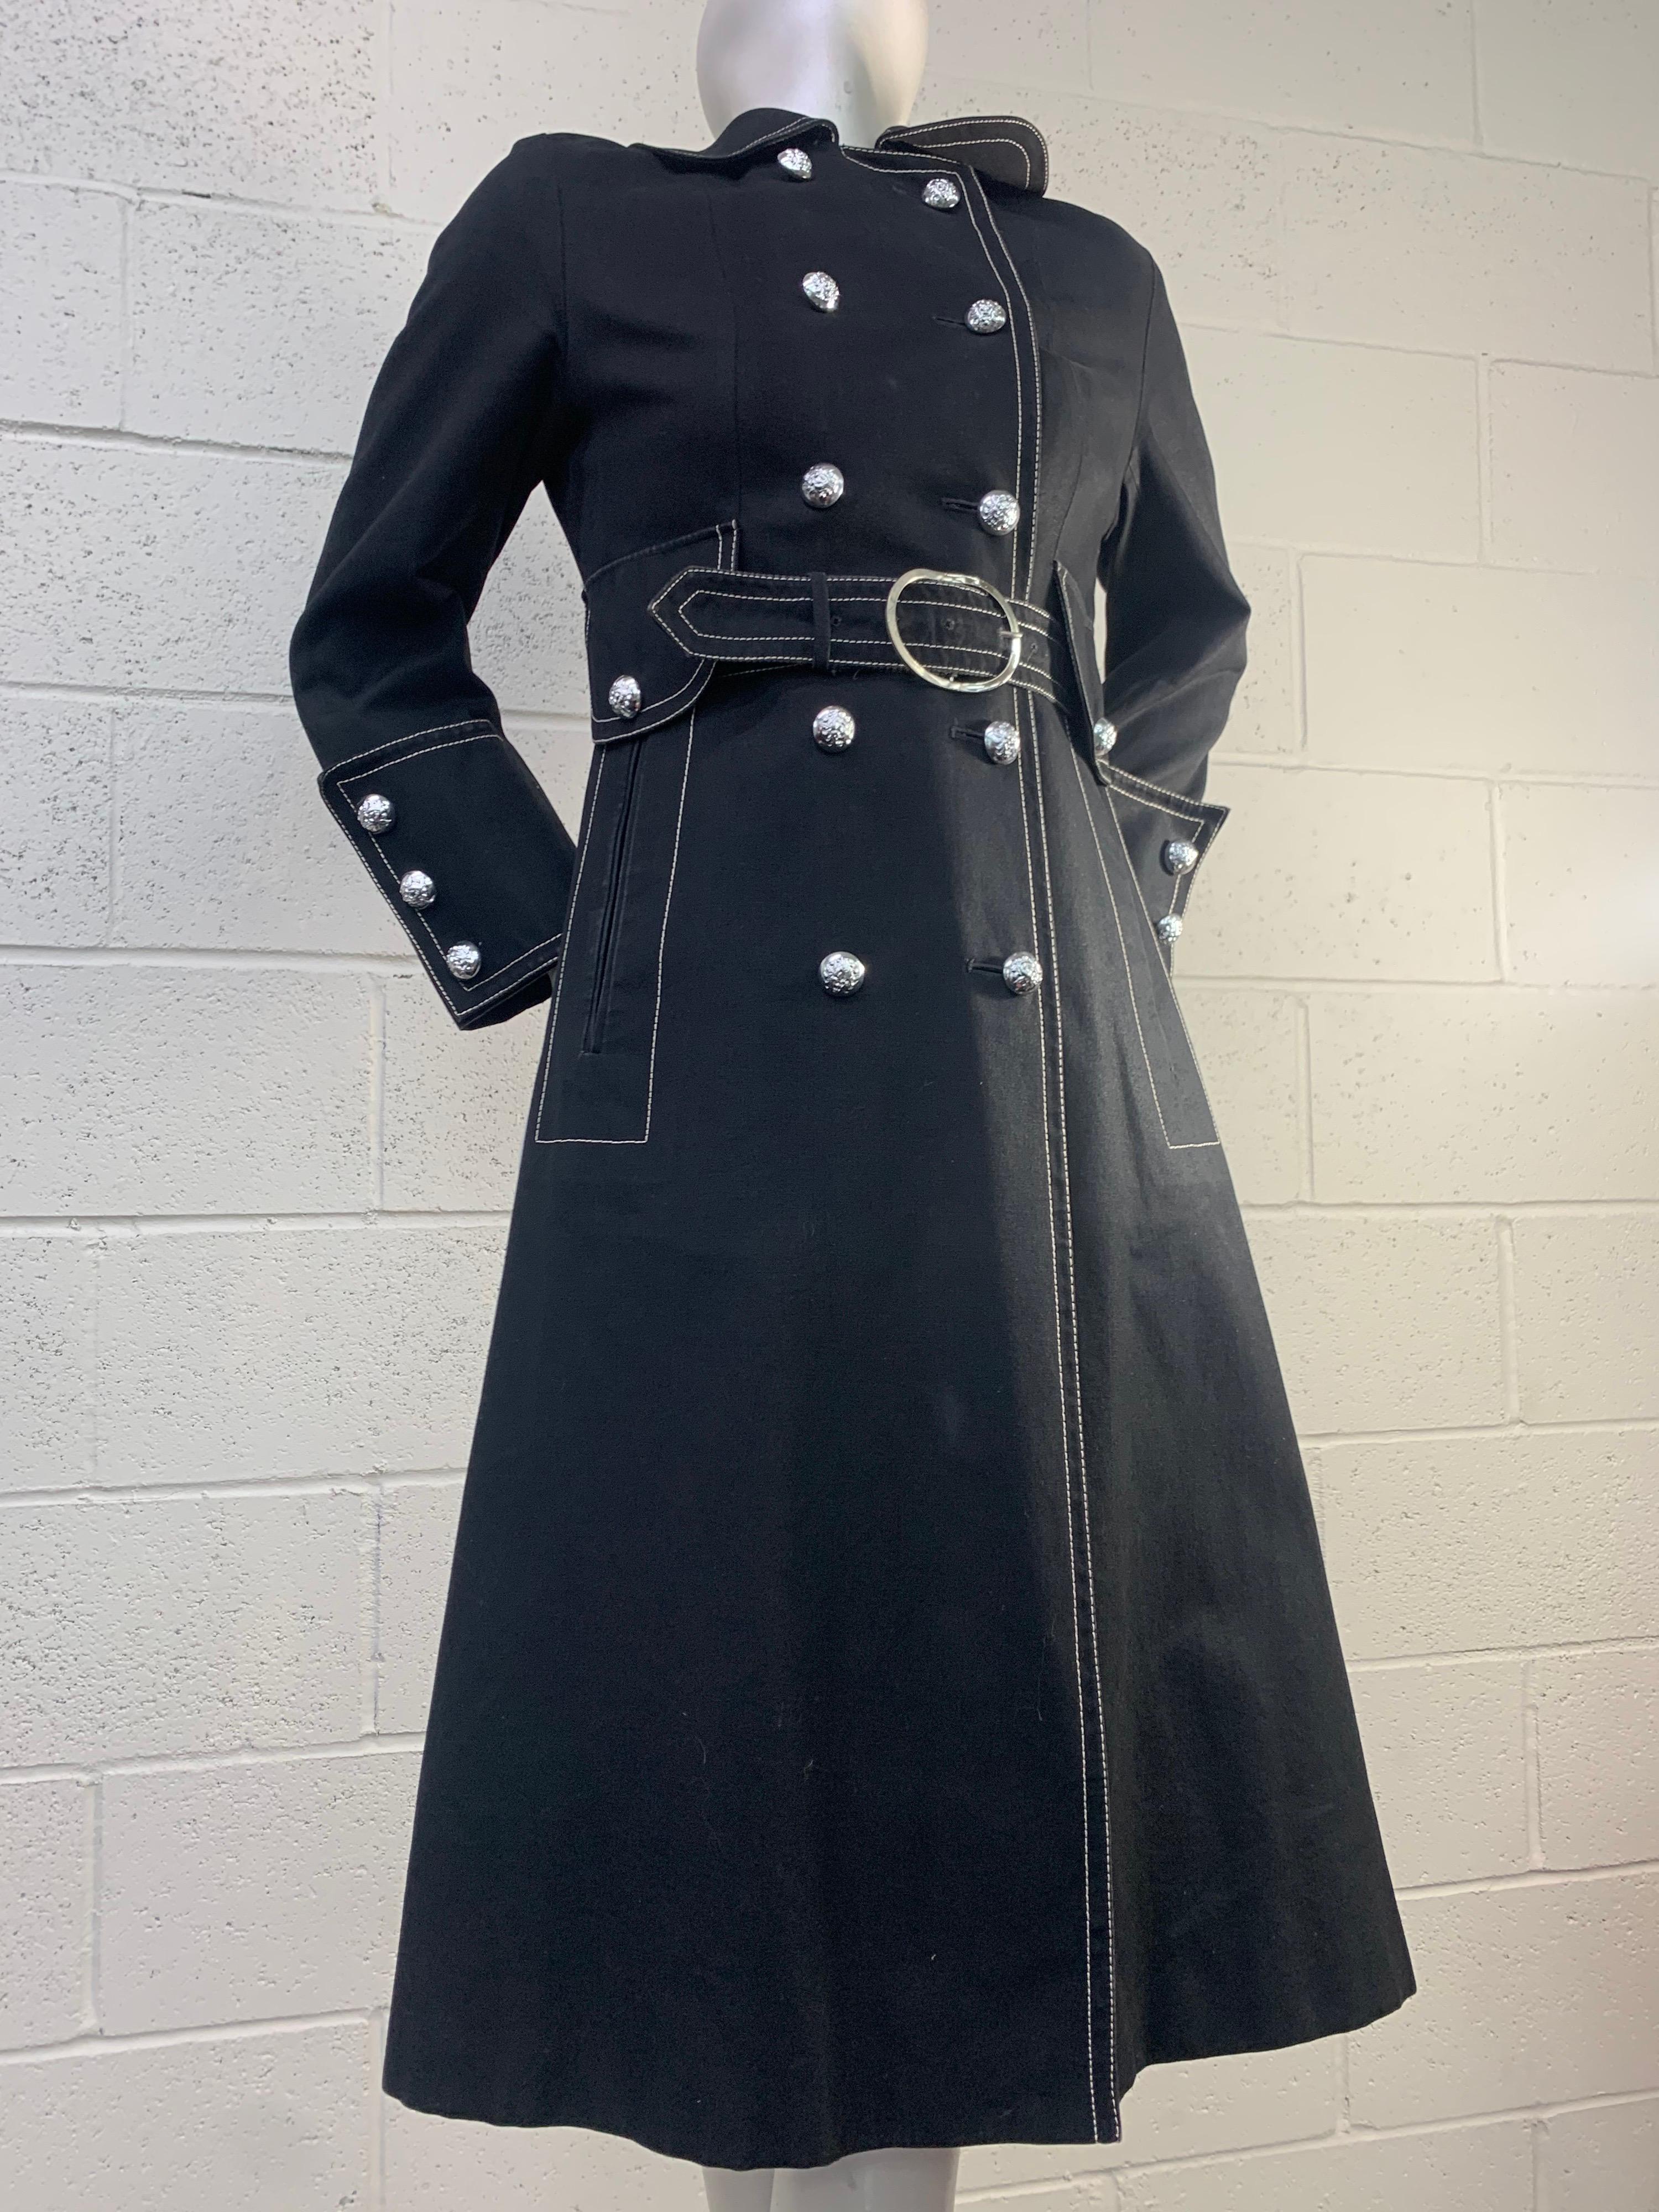 1960 Black Canvas Belted Trenchcoat w/ White Topstitching & Insignia Buttons For Sale 2